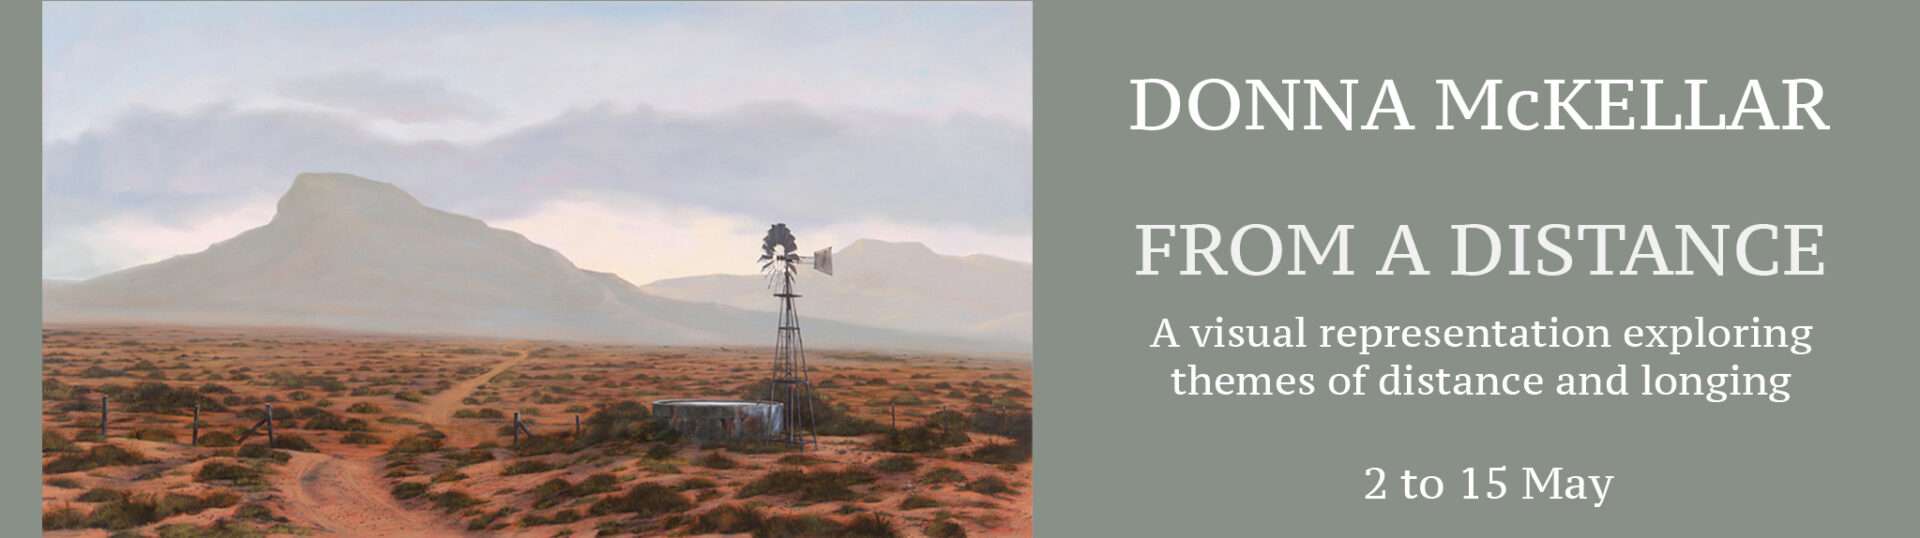 The Studio Art Gallery - Exhibition Header - From a Distance - Solo Exhibition by Donna McKellar